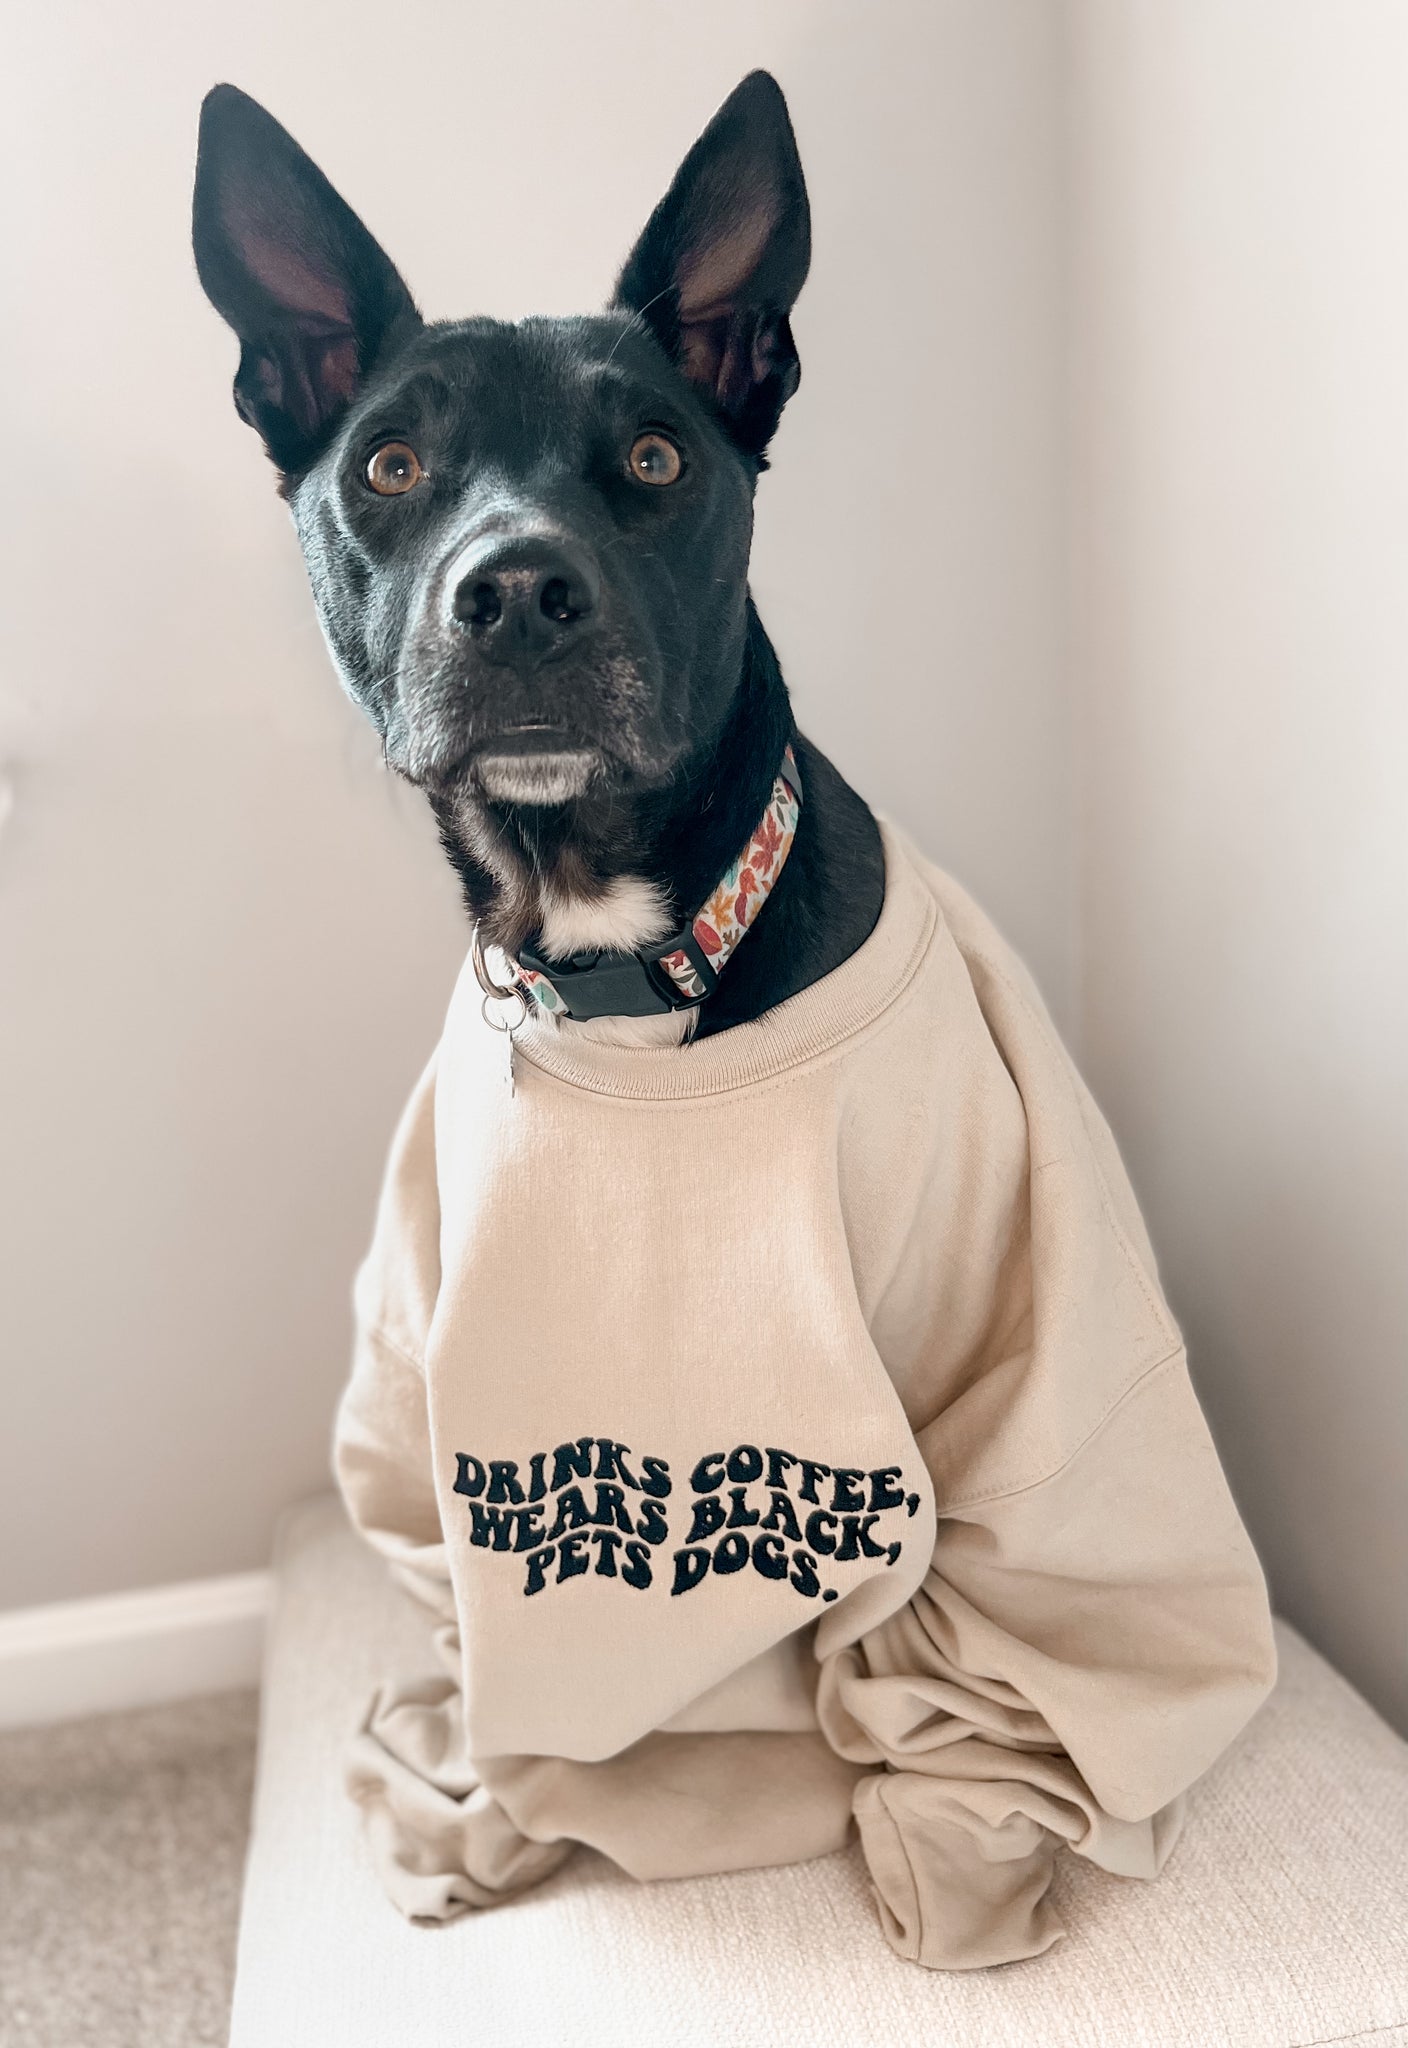 Drinks Coffee, Wears Black, Pets Dogs Embroidered Crewneck